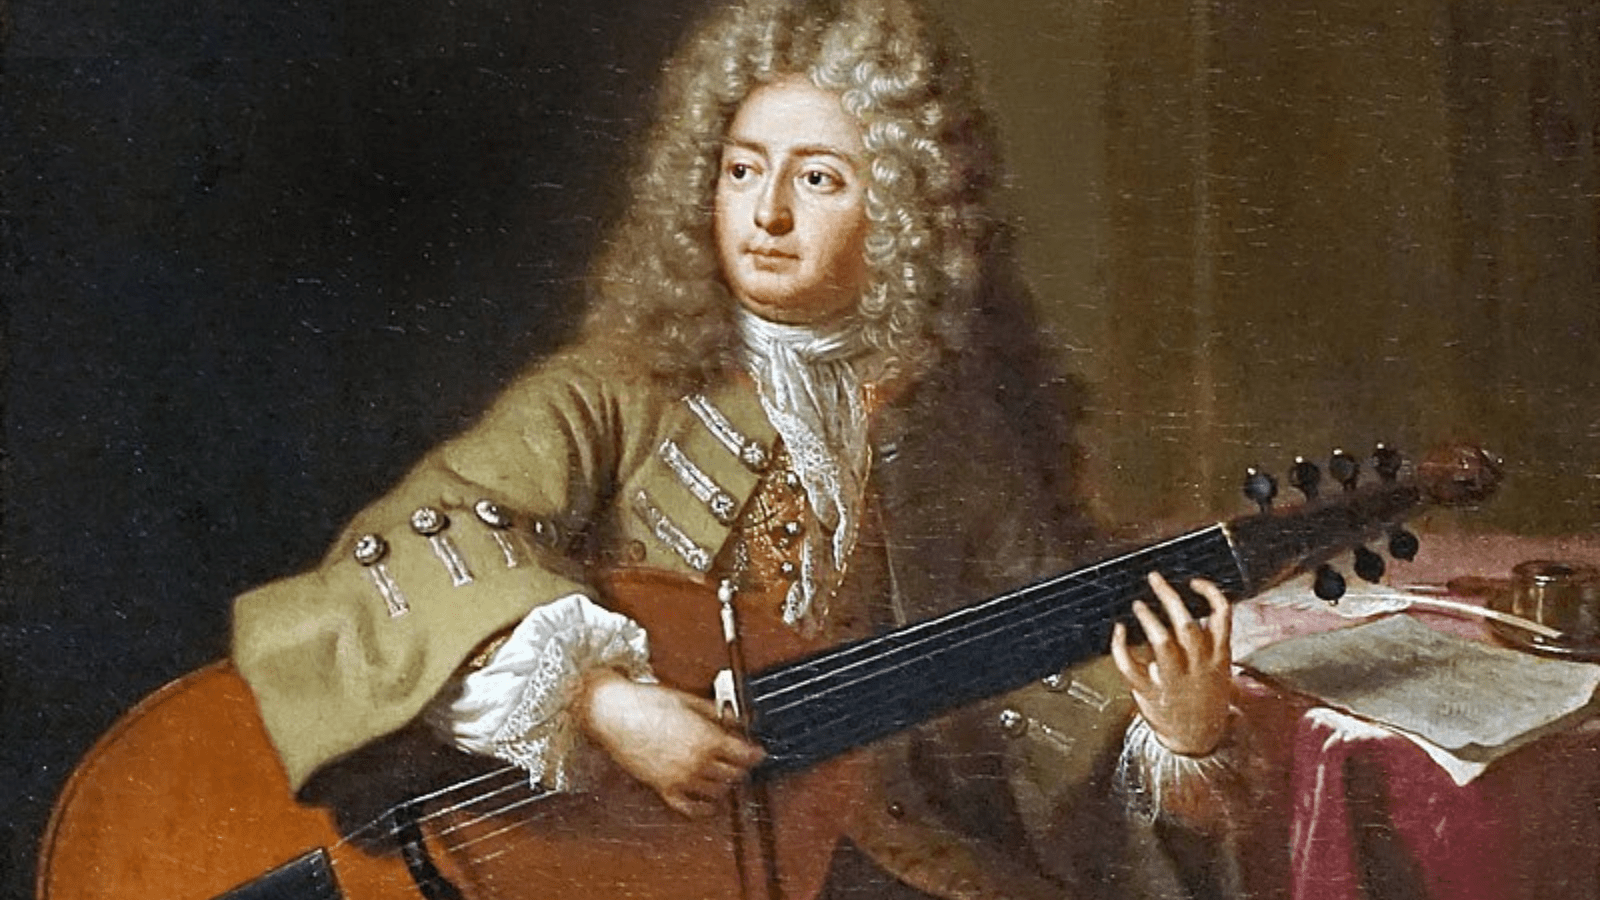 Oil painting portrait of Marin Marais, French composer. He is a white man with a round face, wearing a long, curly, off-white wig that falls to his shoulders. He is dressed in a golden coat, and is holding a viola da gamba horizontally across his lap, as if he's about to strum the instrument. 